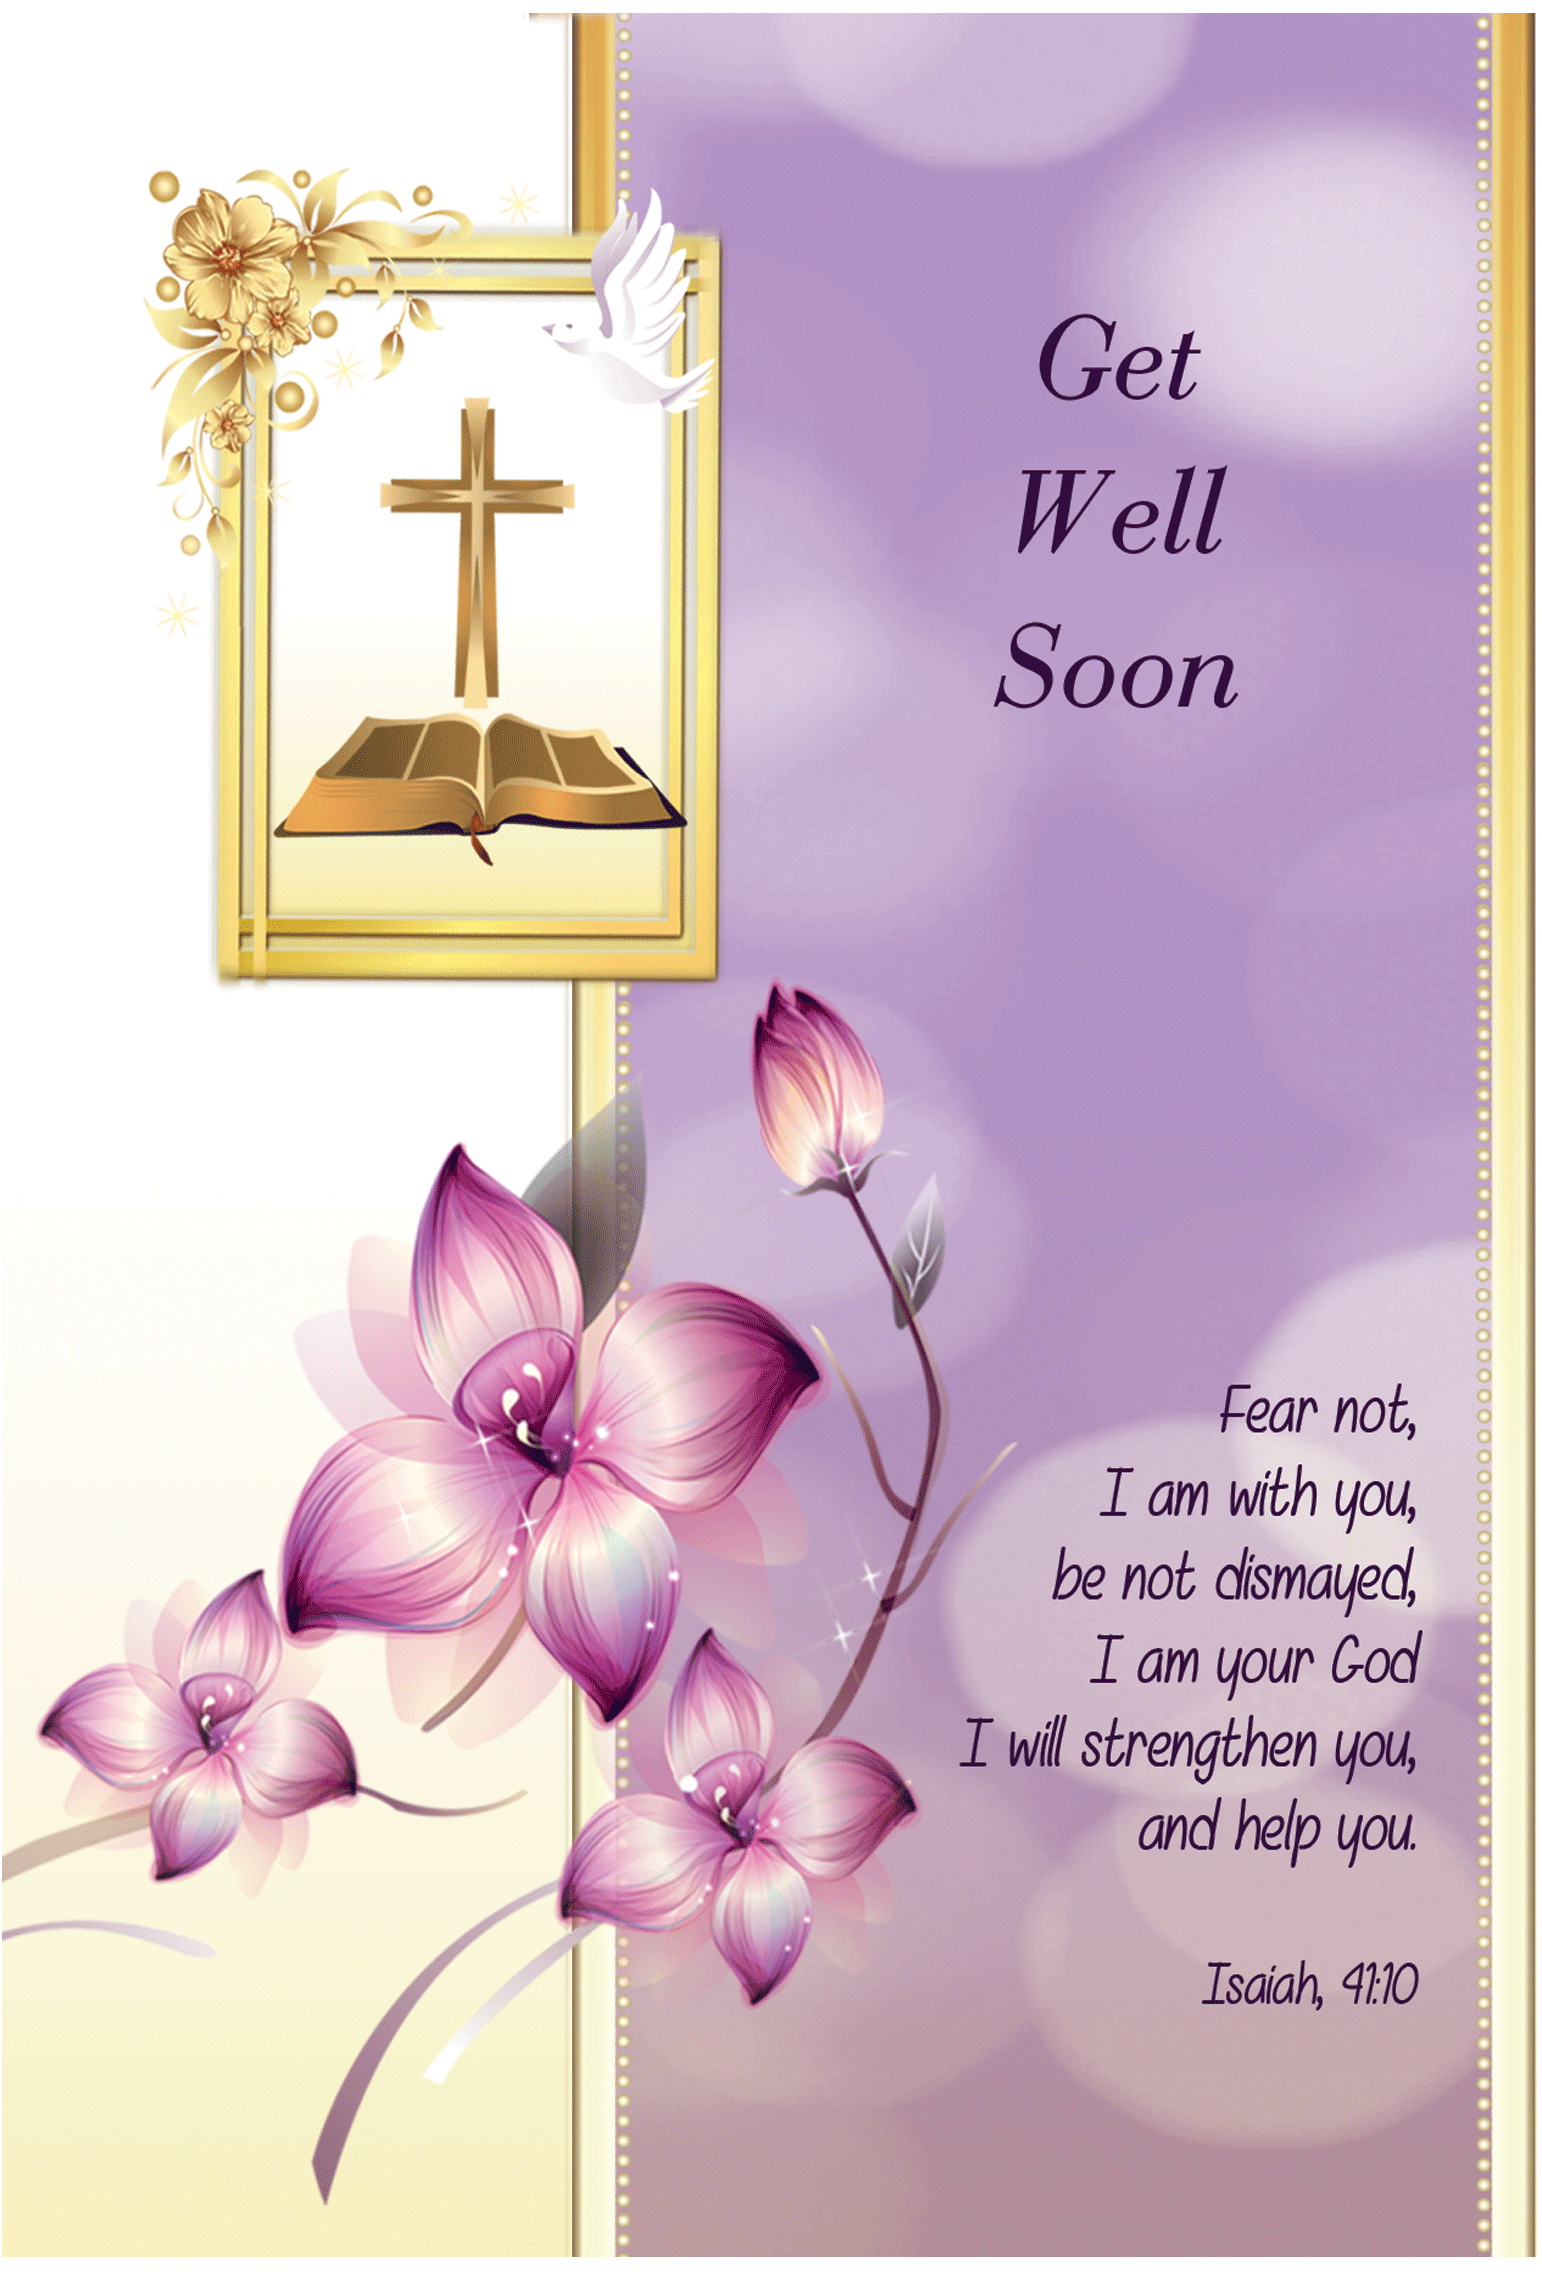 get-well-religious-cards-gw74-pack-of-12-2-designs